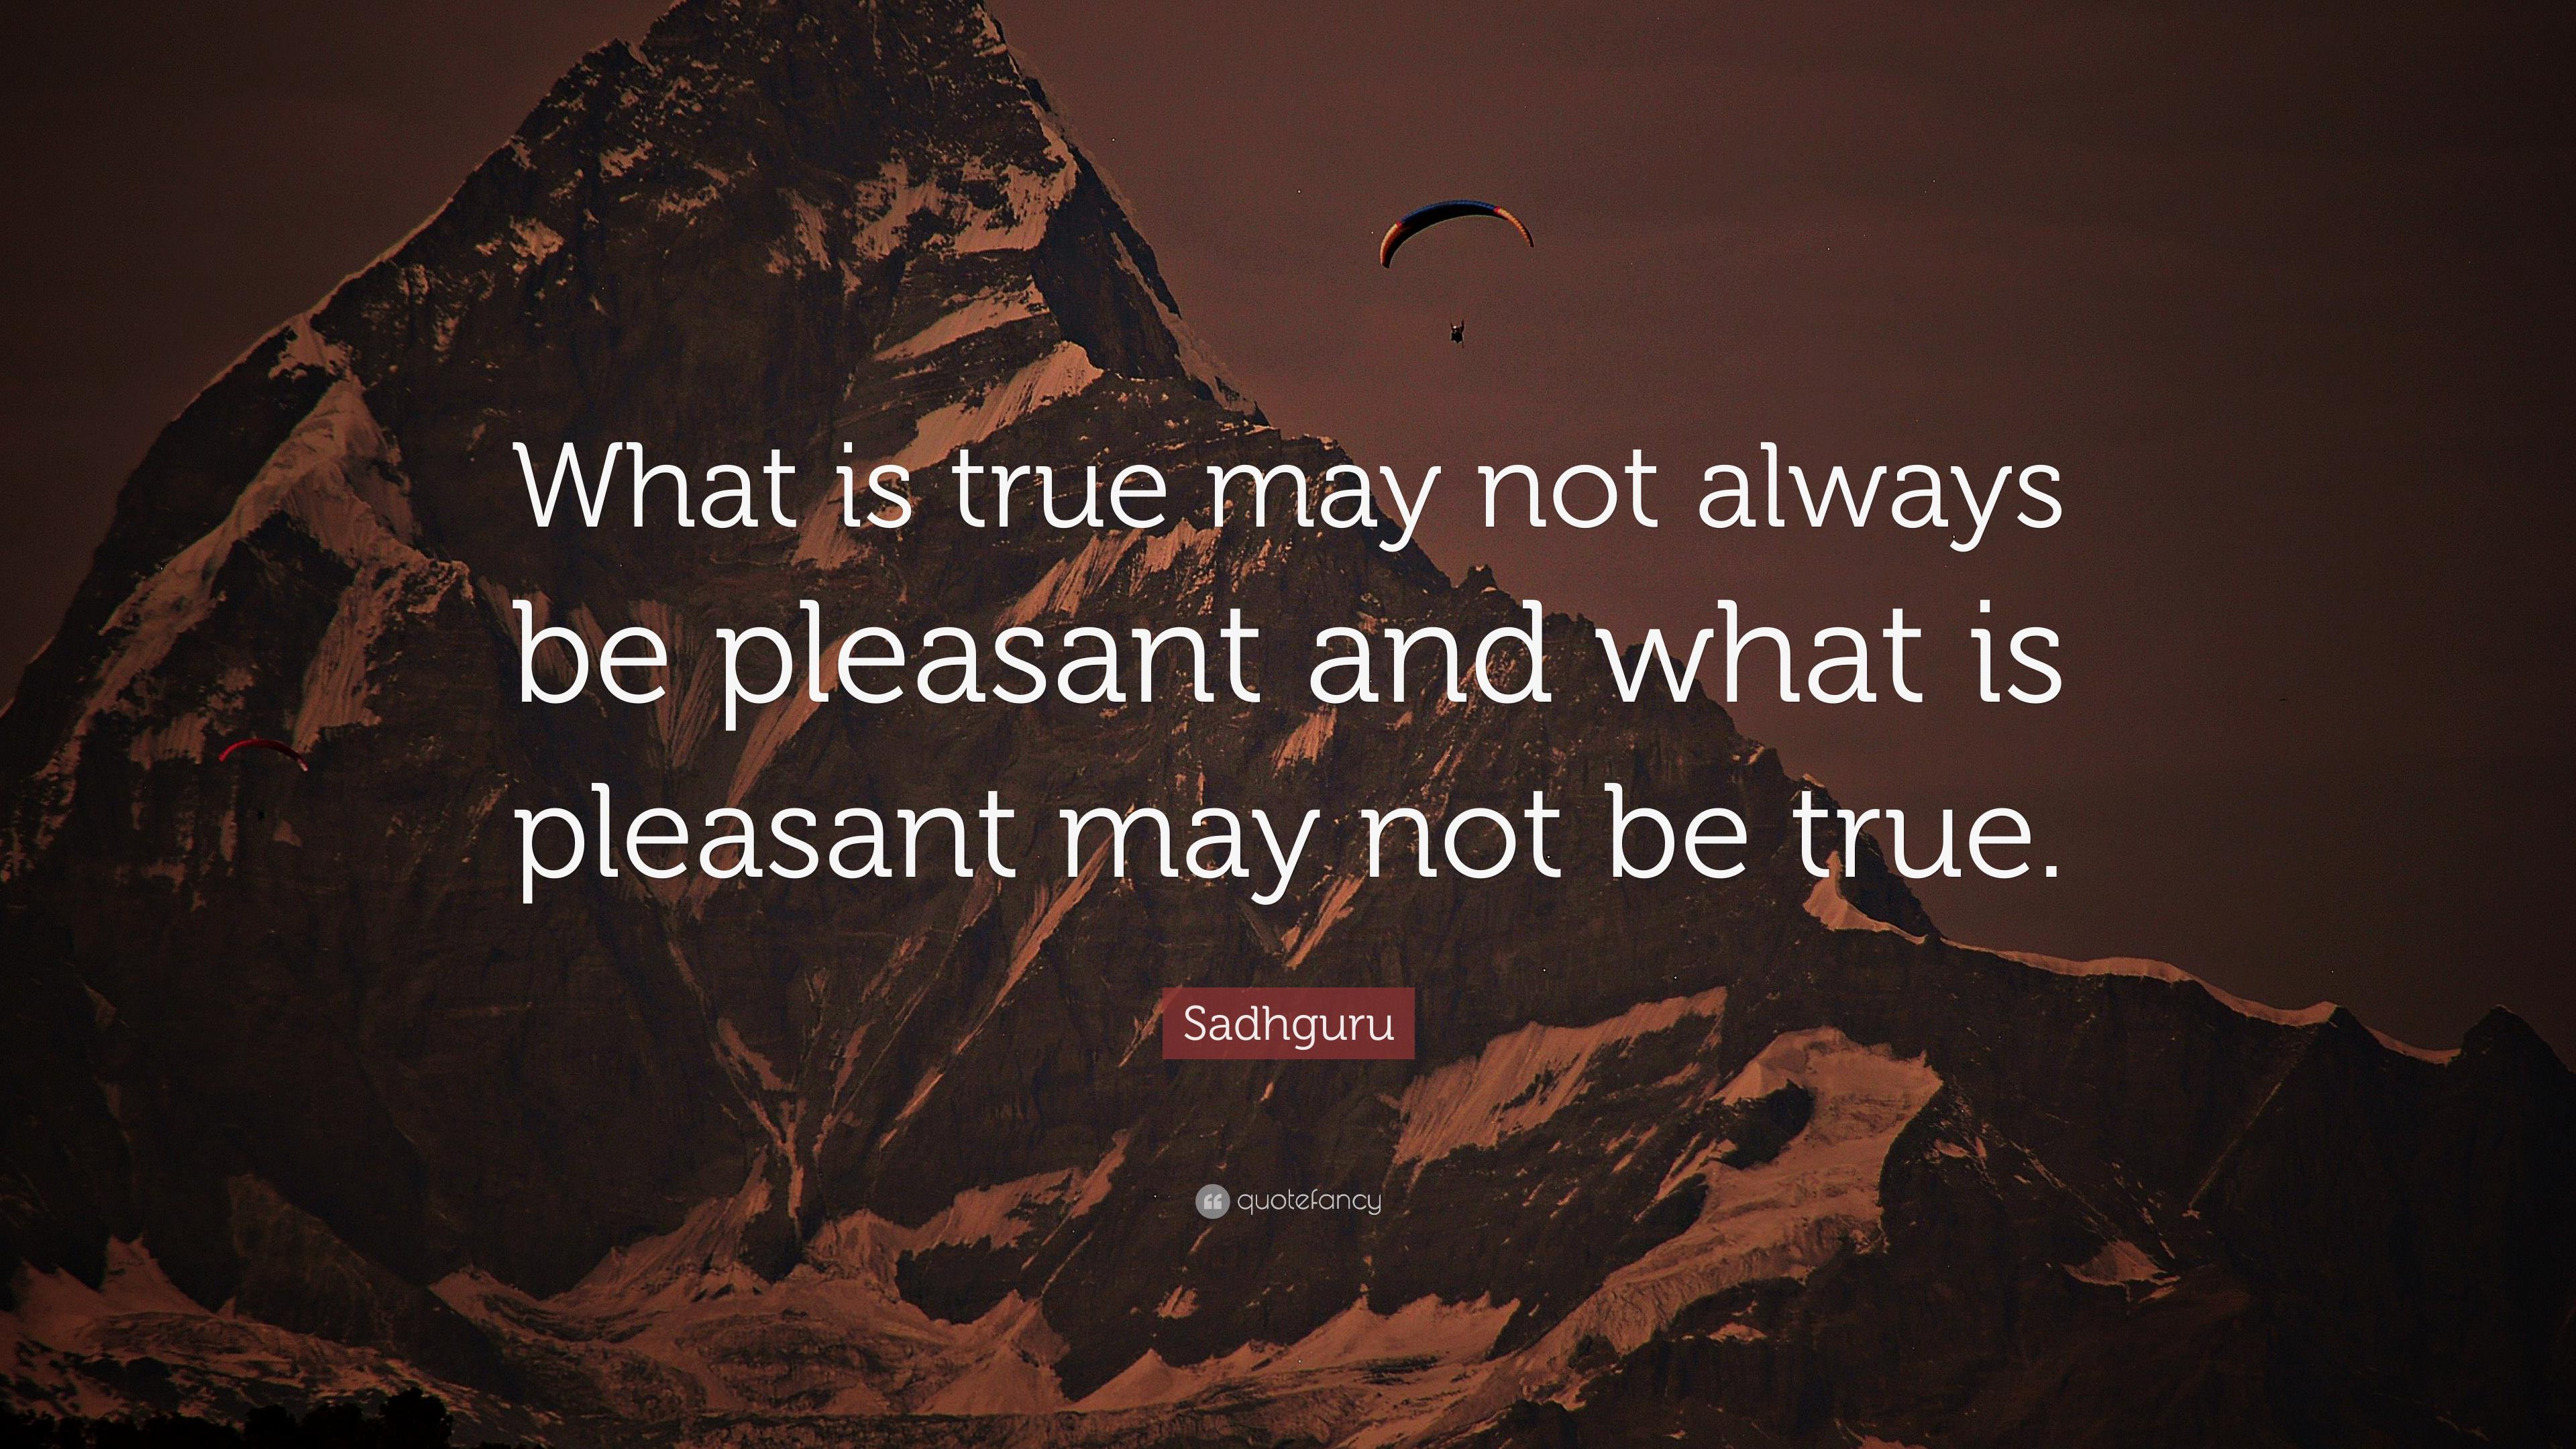 Sadhguru Quote: “What is true may not always be pleasant and what